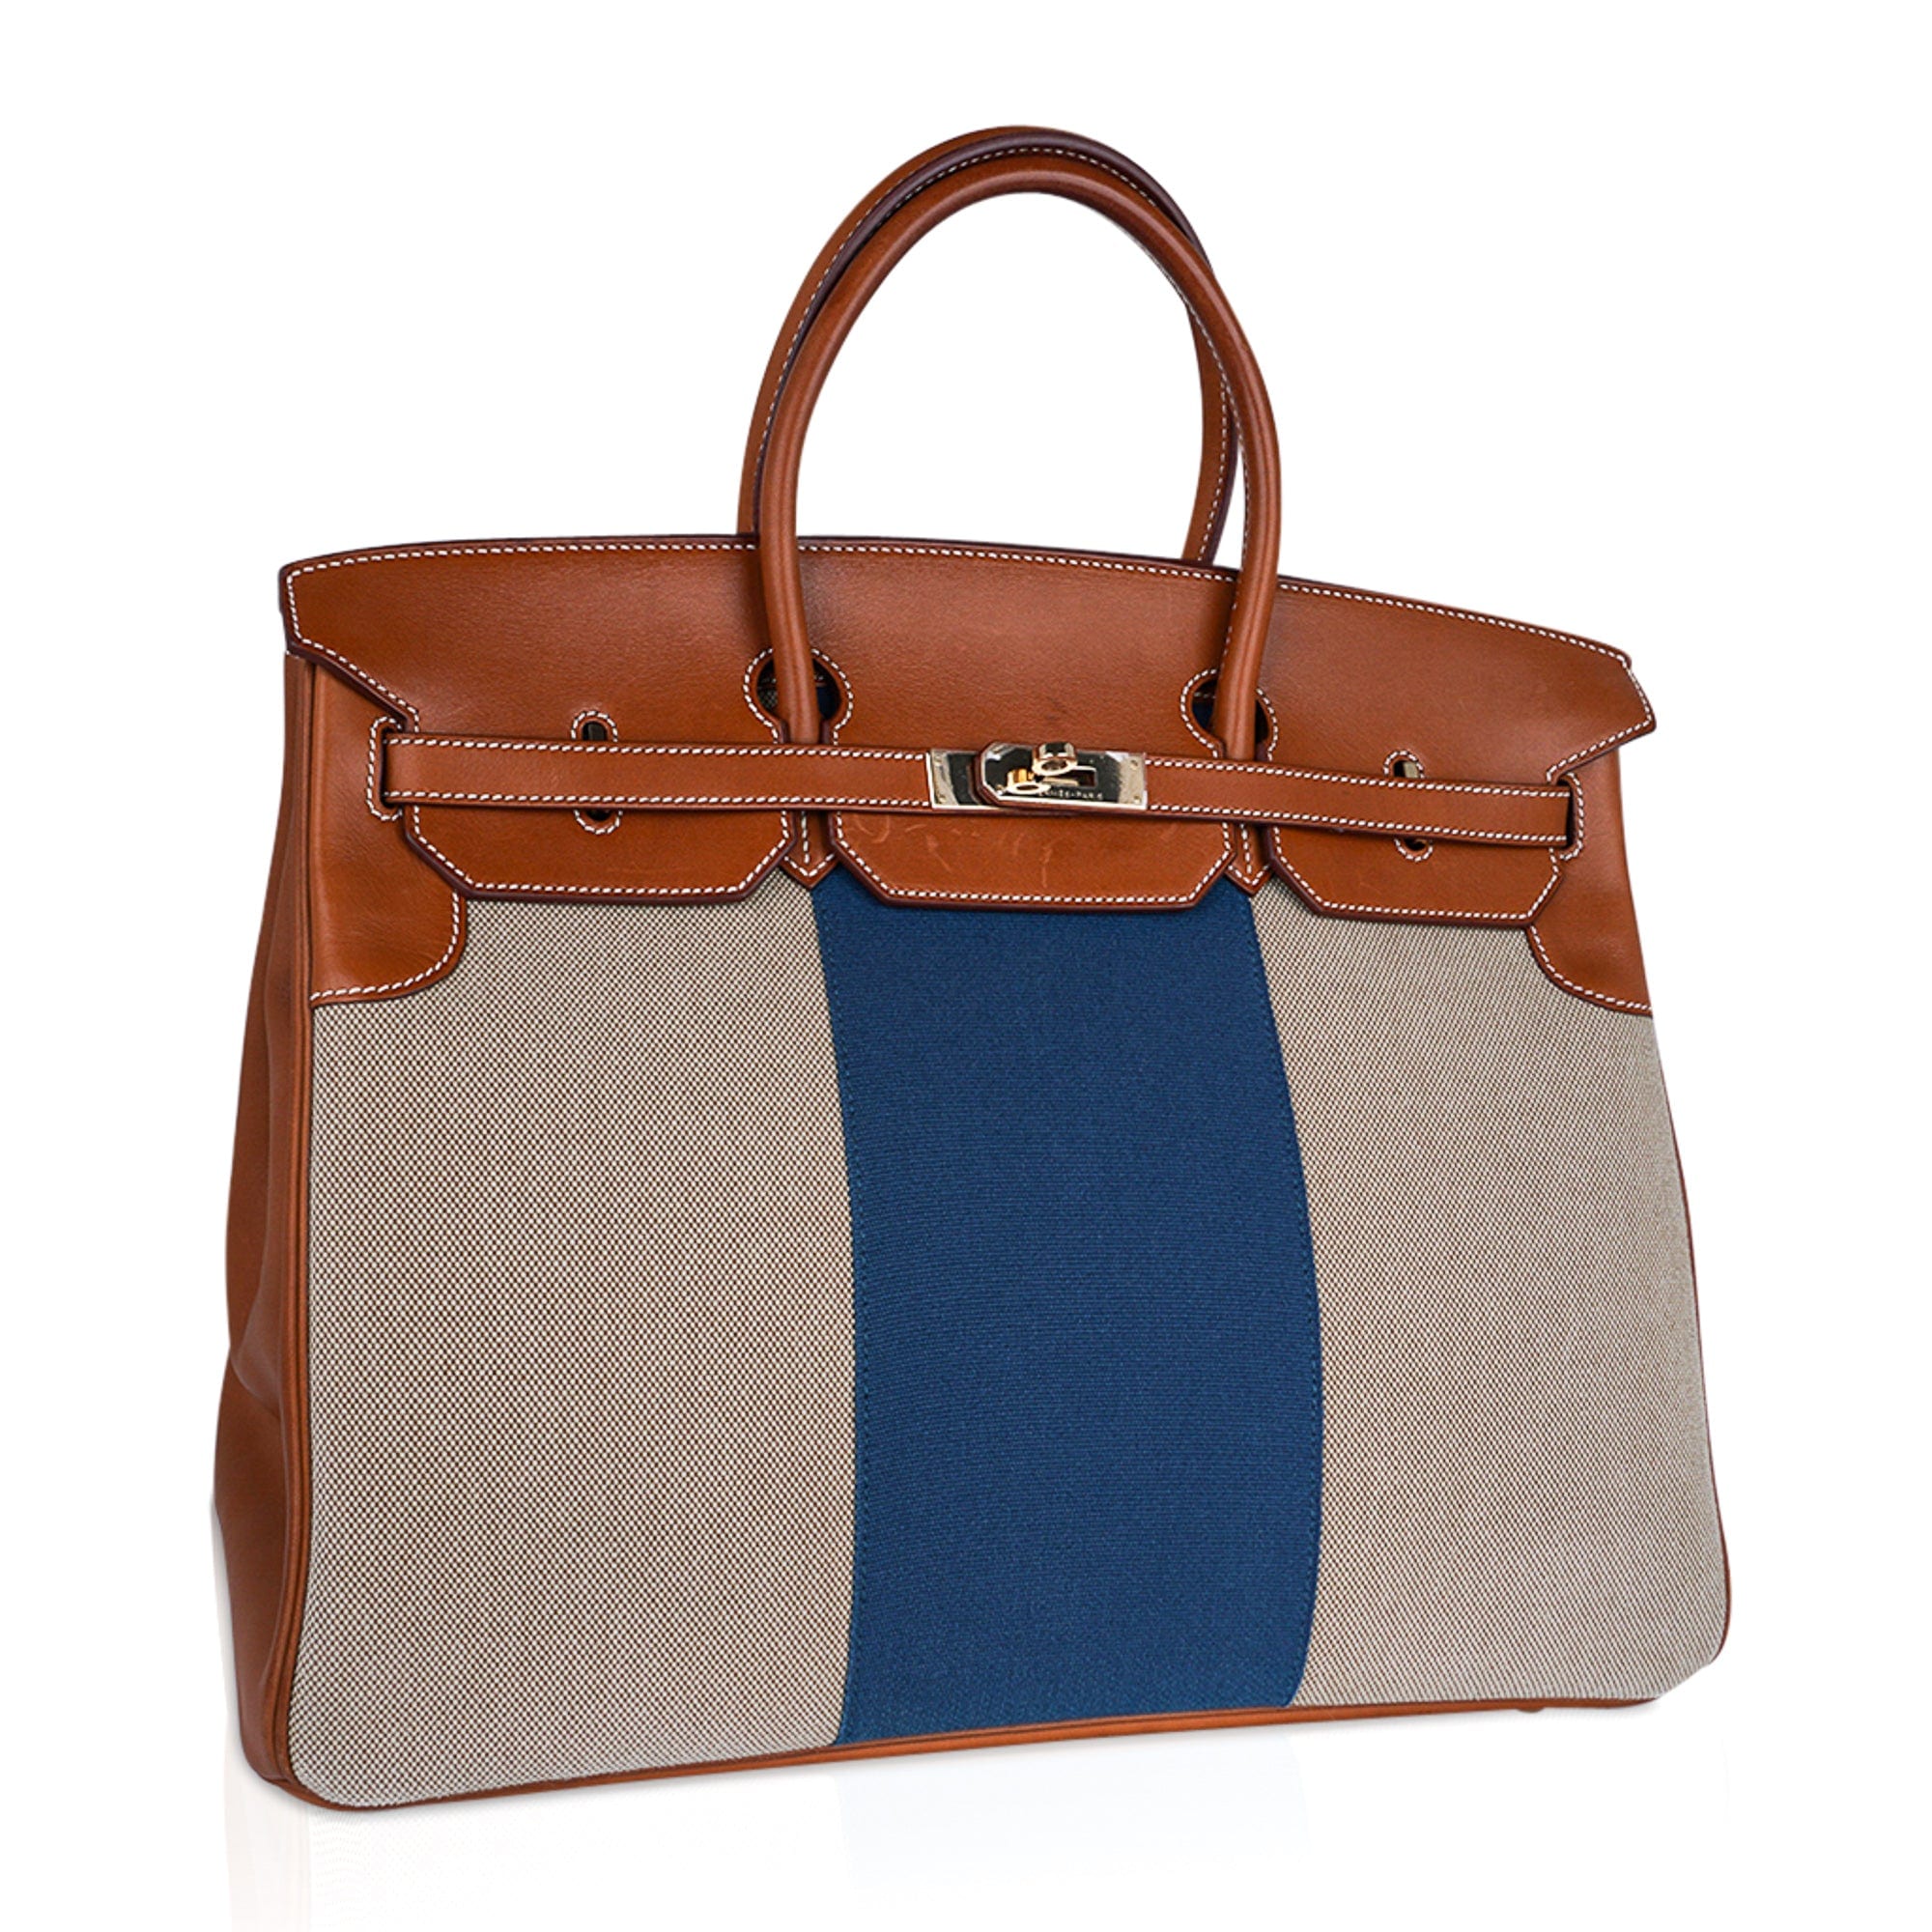 Barenia and Natural Birkin 40 cm in Toile and Barenia Leather with